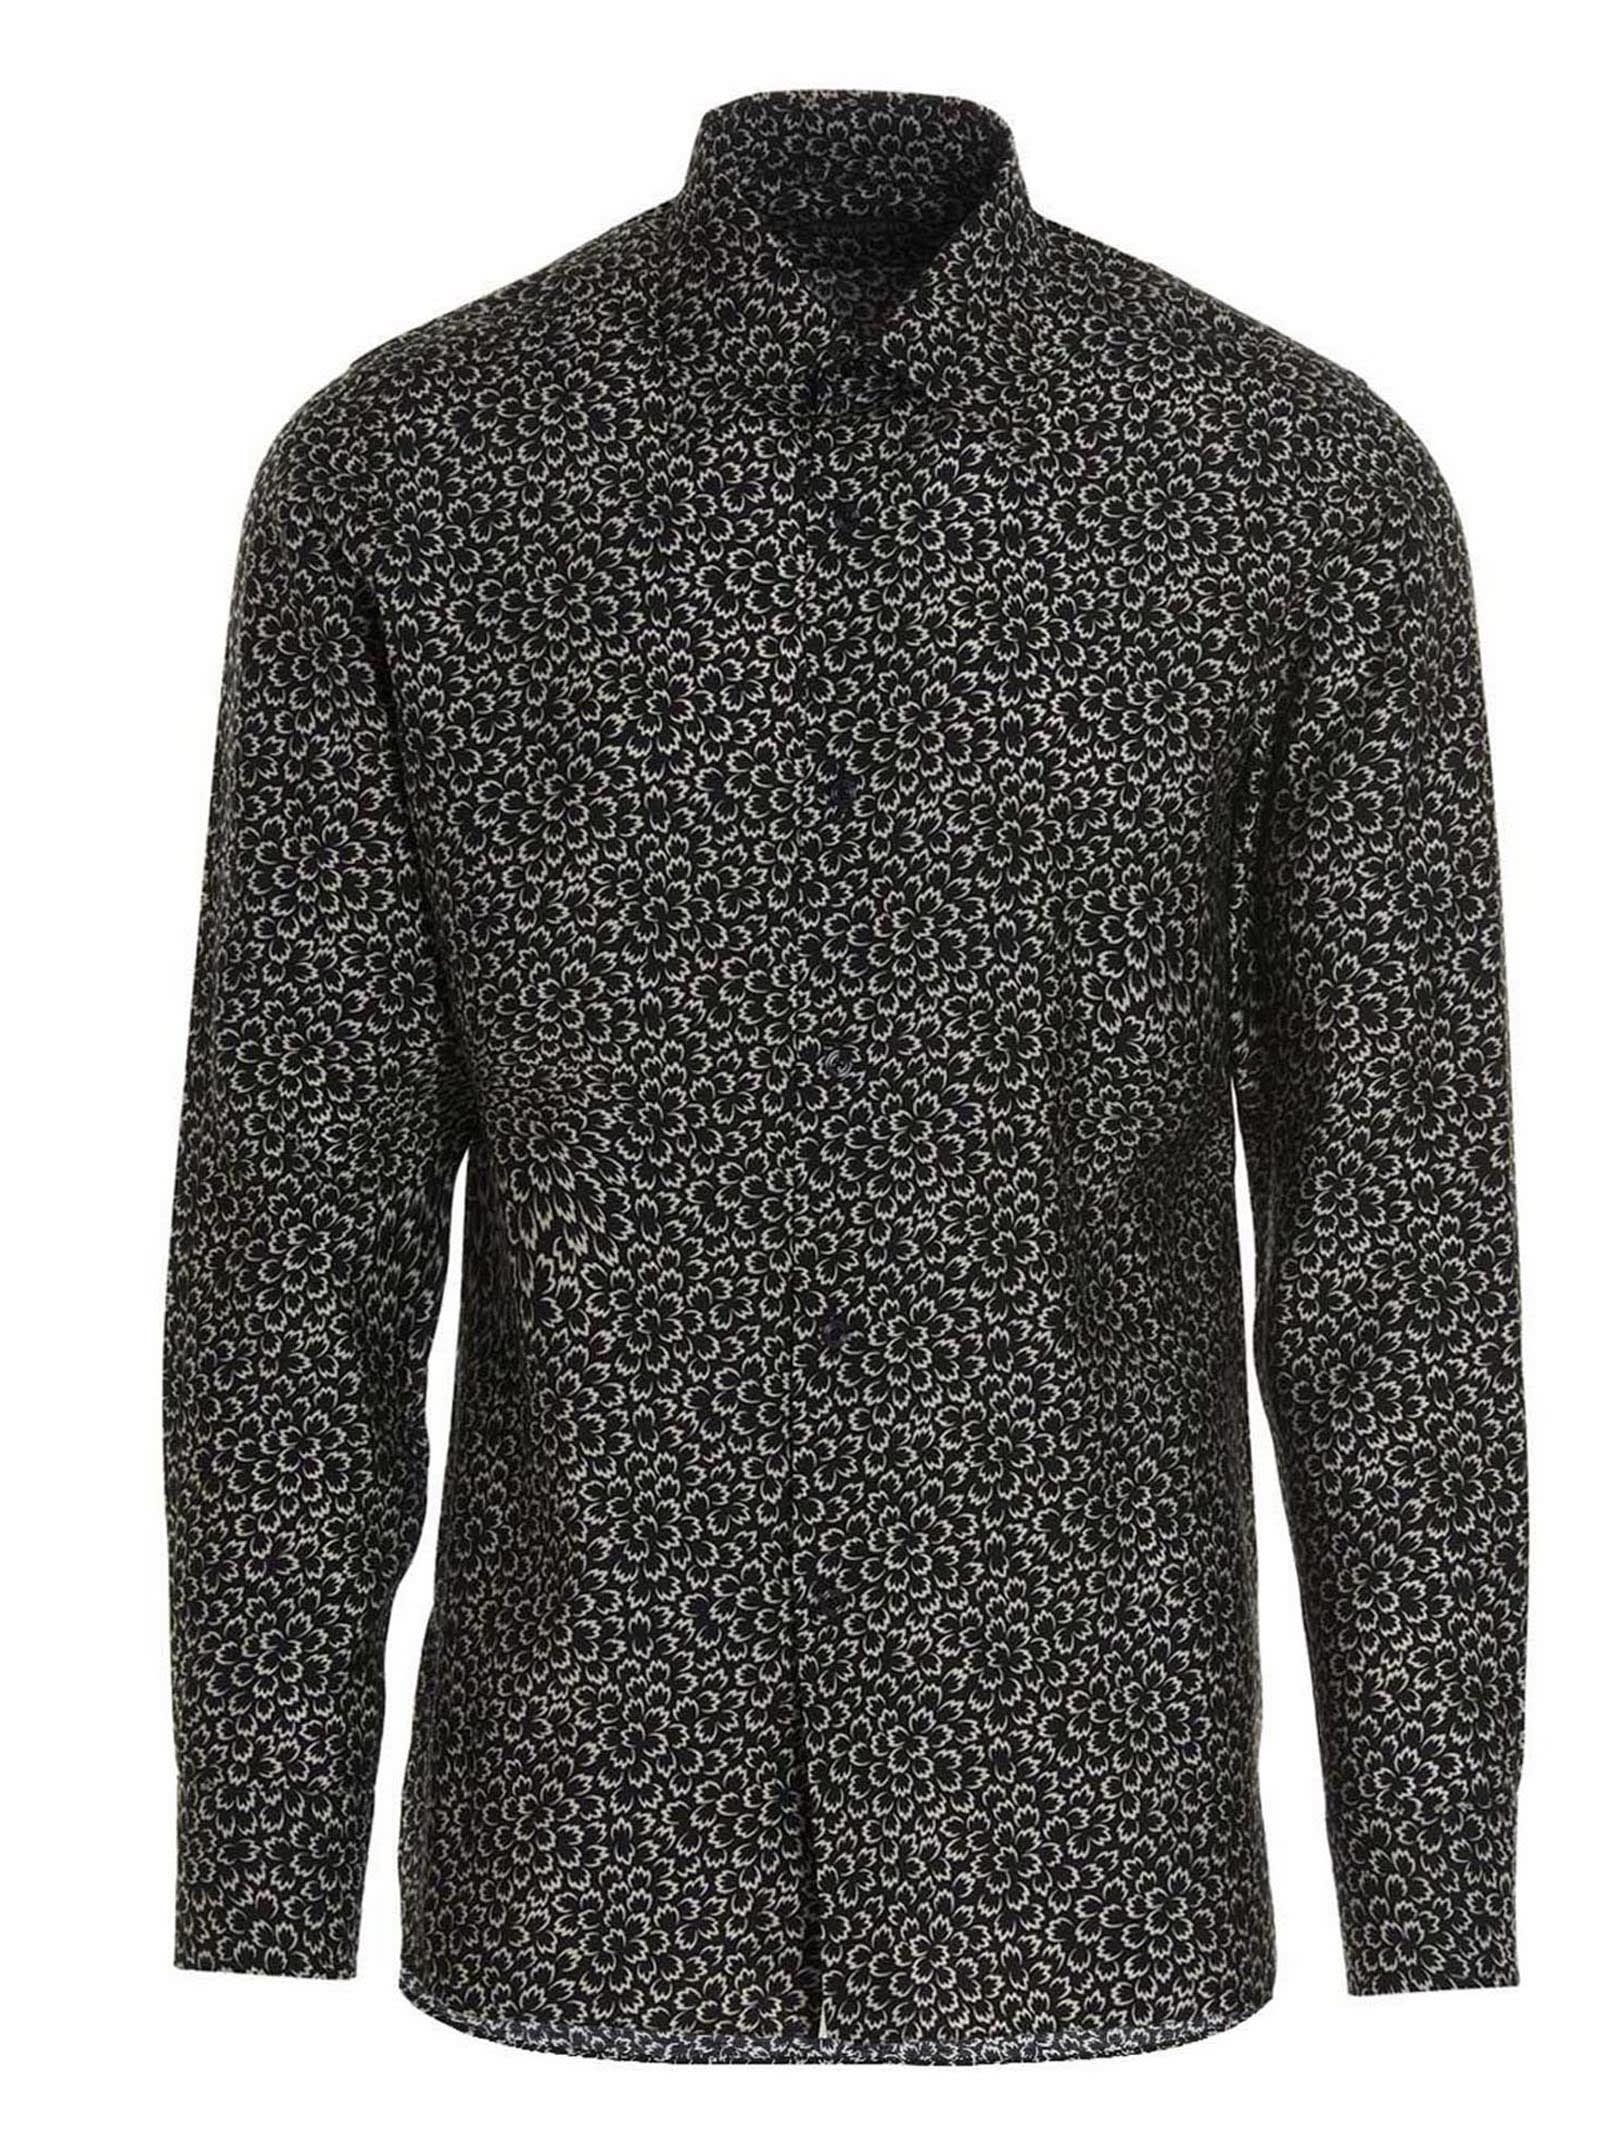 Tom Ford All Over Print Shirt